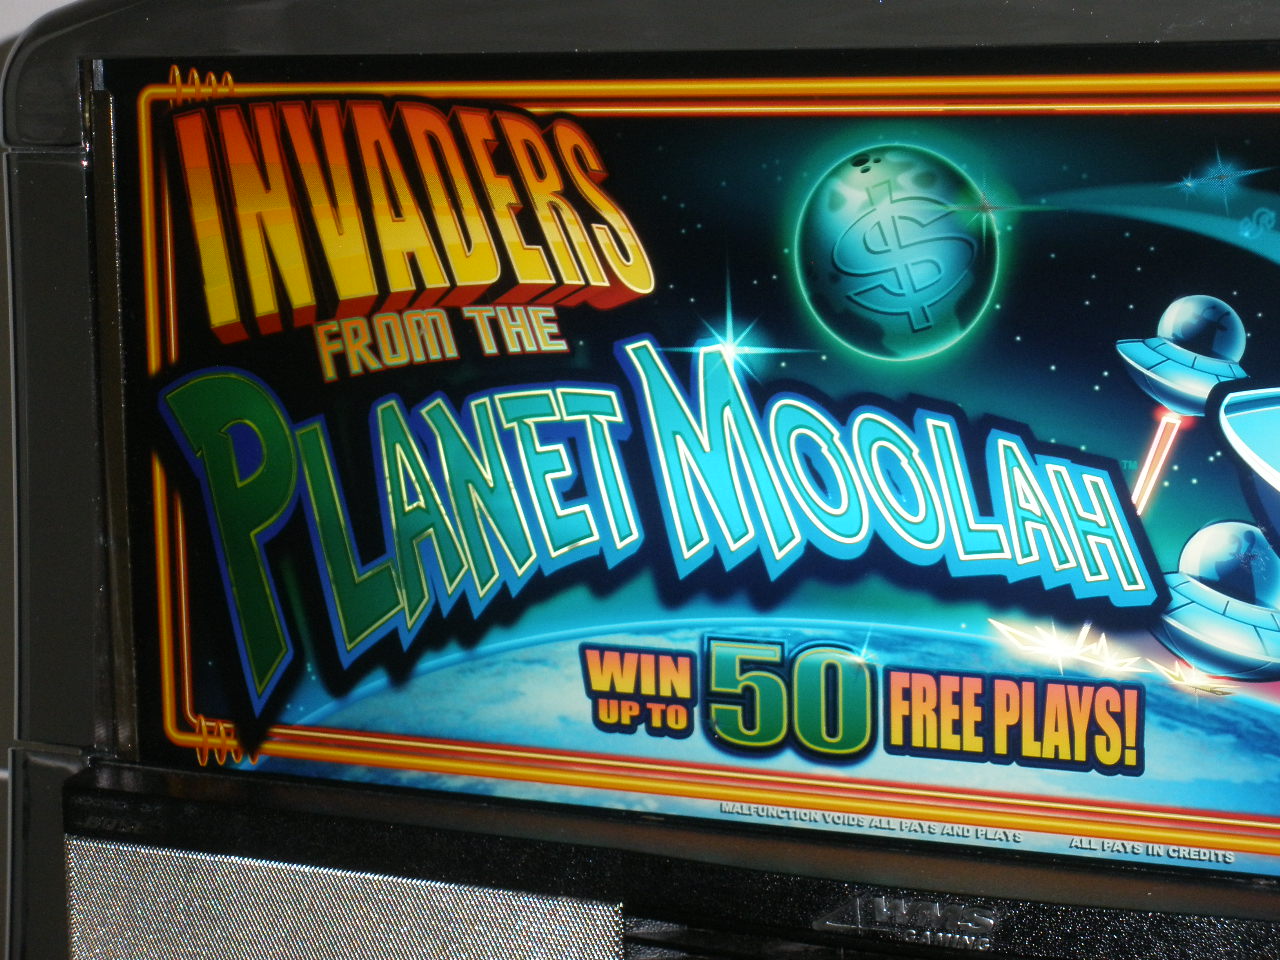 new invaders from planet moolah